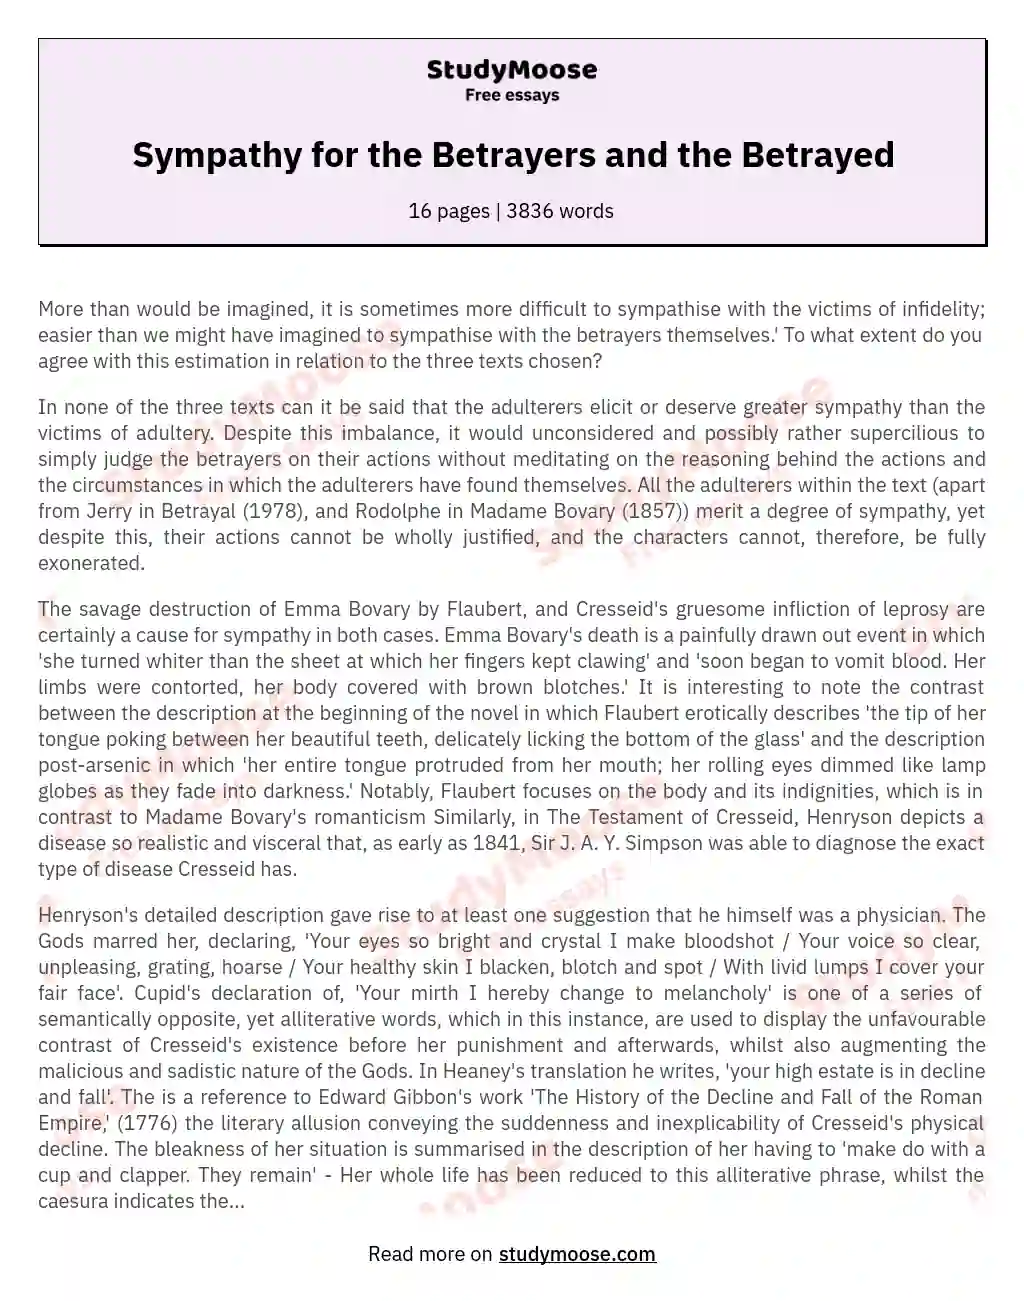 Sympathy for the Betrayers and the Betrayed